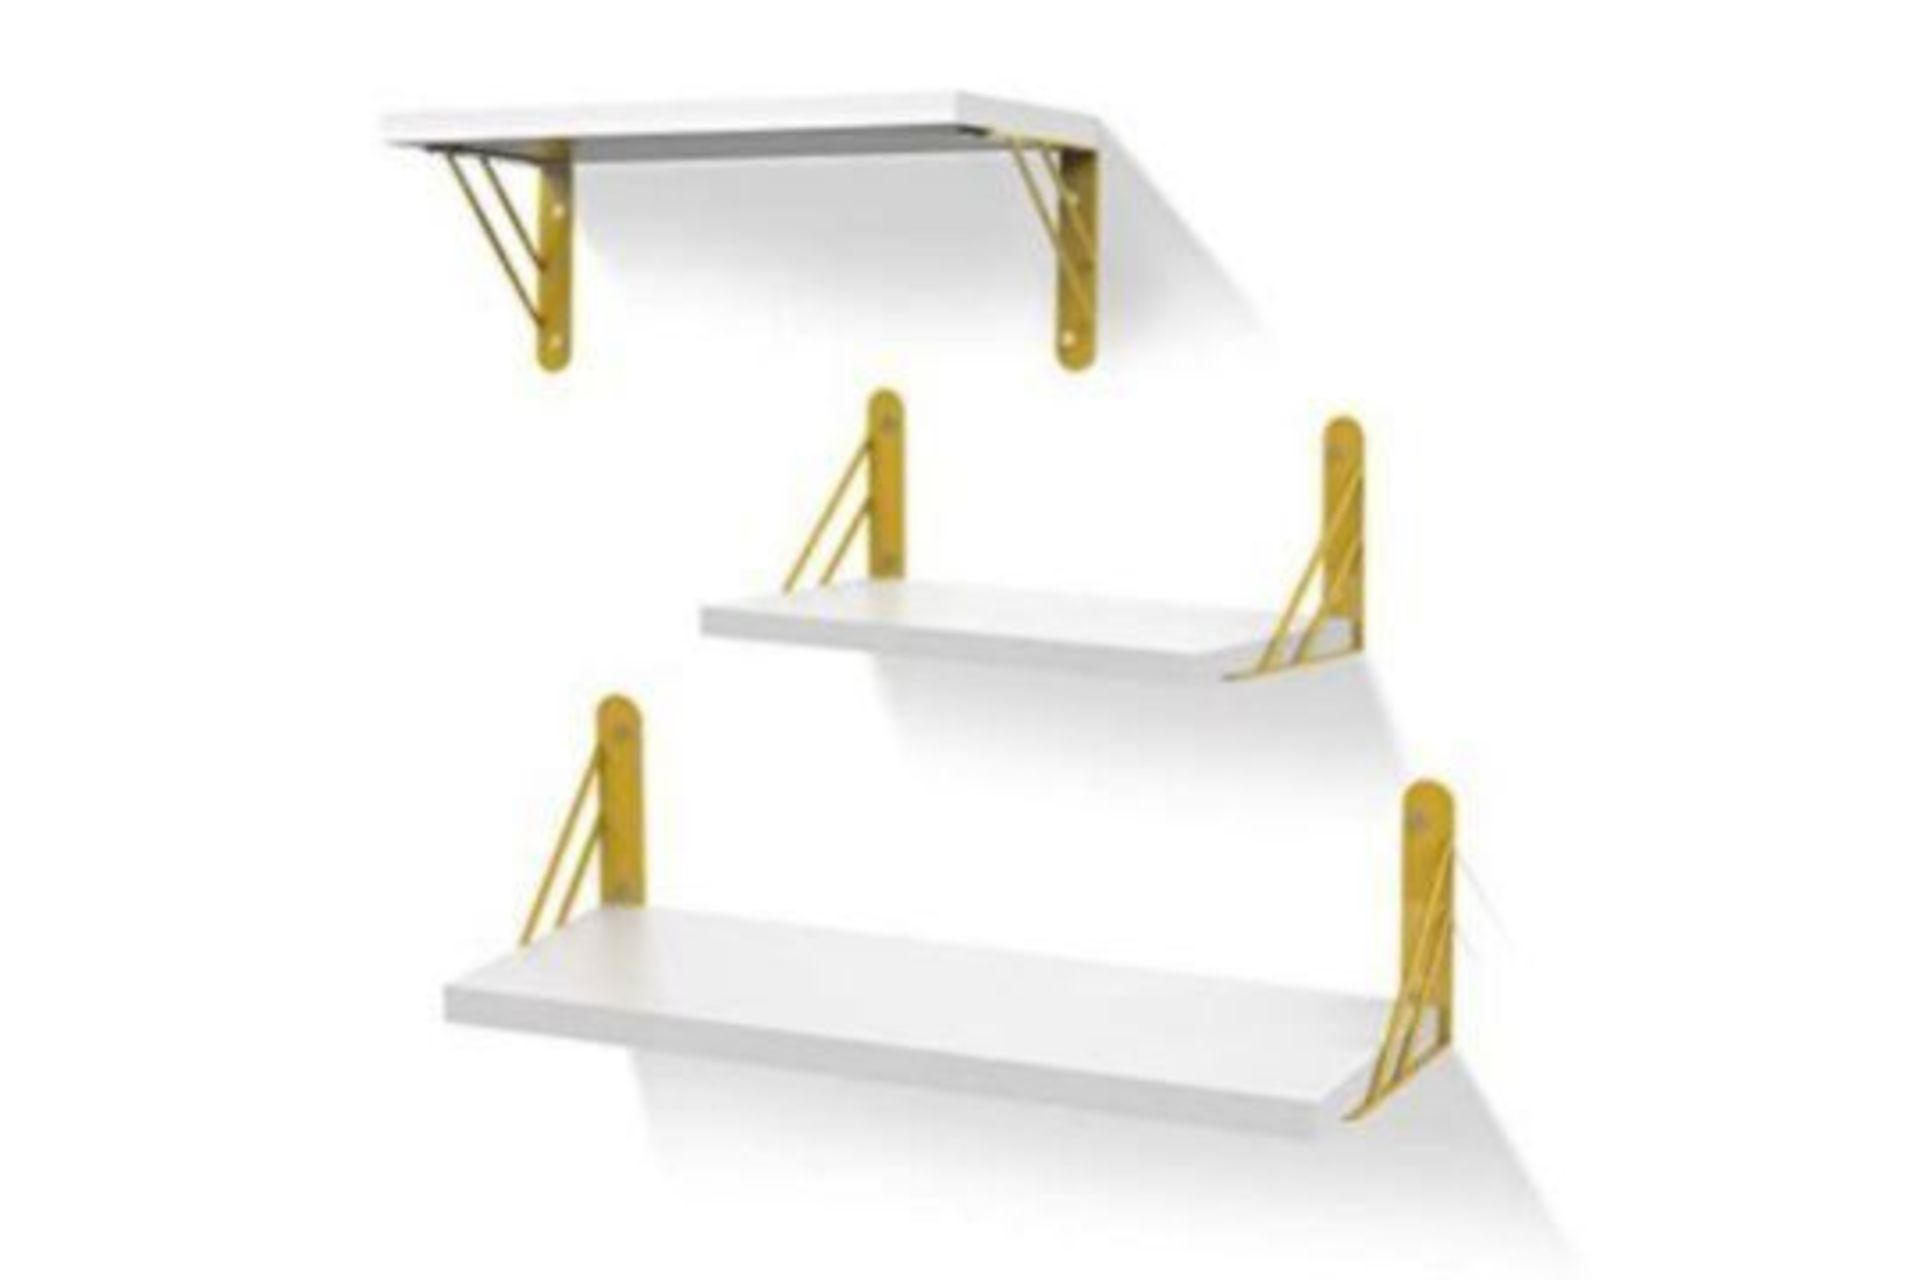 Brand New Sets of 3 White Floating Shelf with Golden Hardware Brackets RRP £60 each